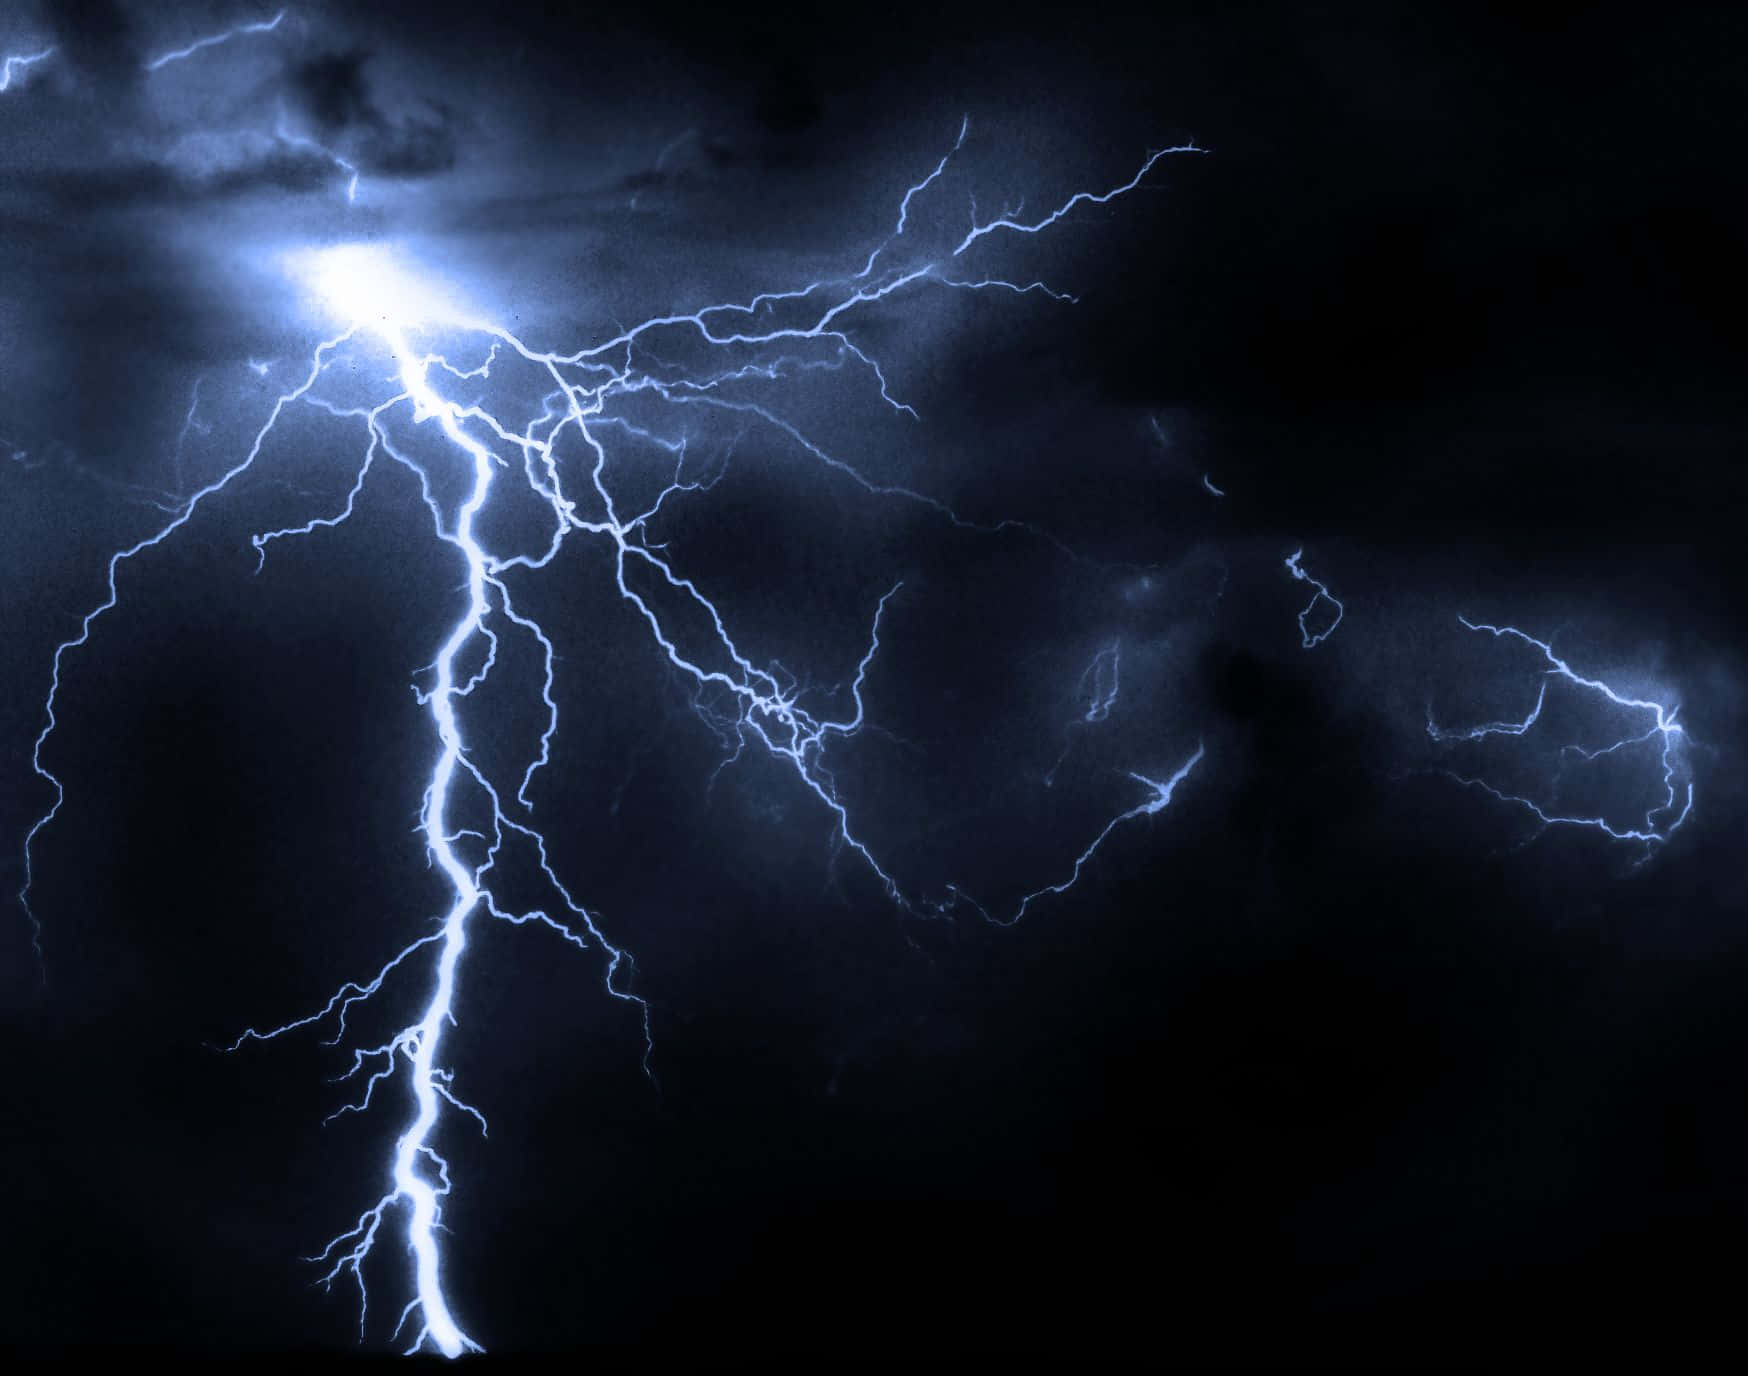 Electric Blues - A Mesmerizing Image Of Blue Lightning In A Dark Night Sky Background